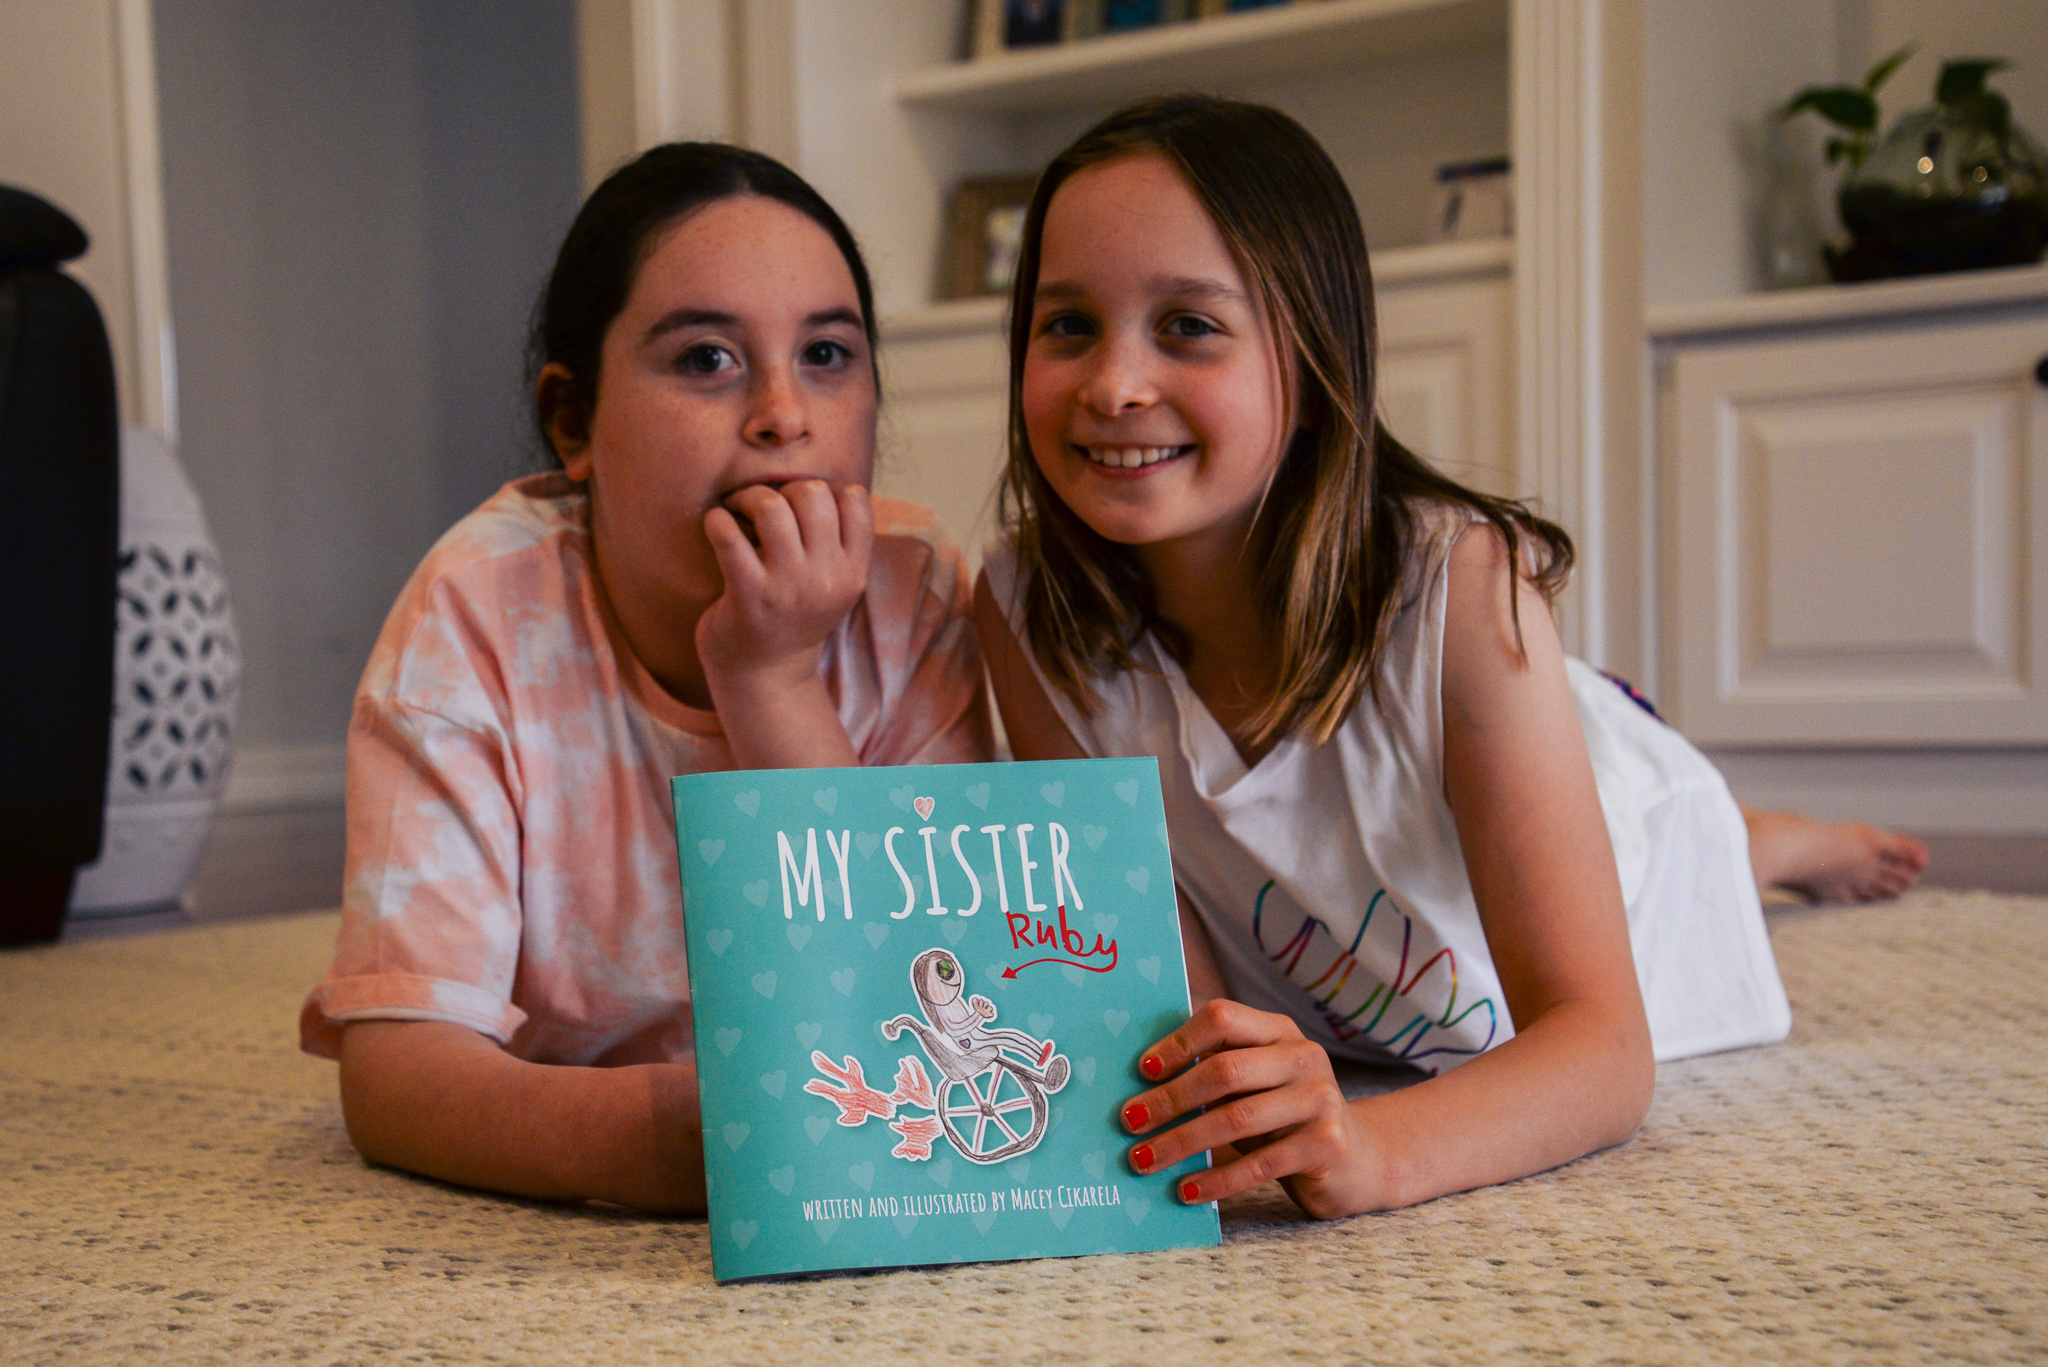 Sisters Ruby and Macey are laying on the floor holding Macey's children's book called 'My Sister'